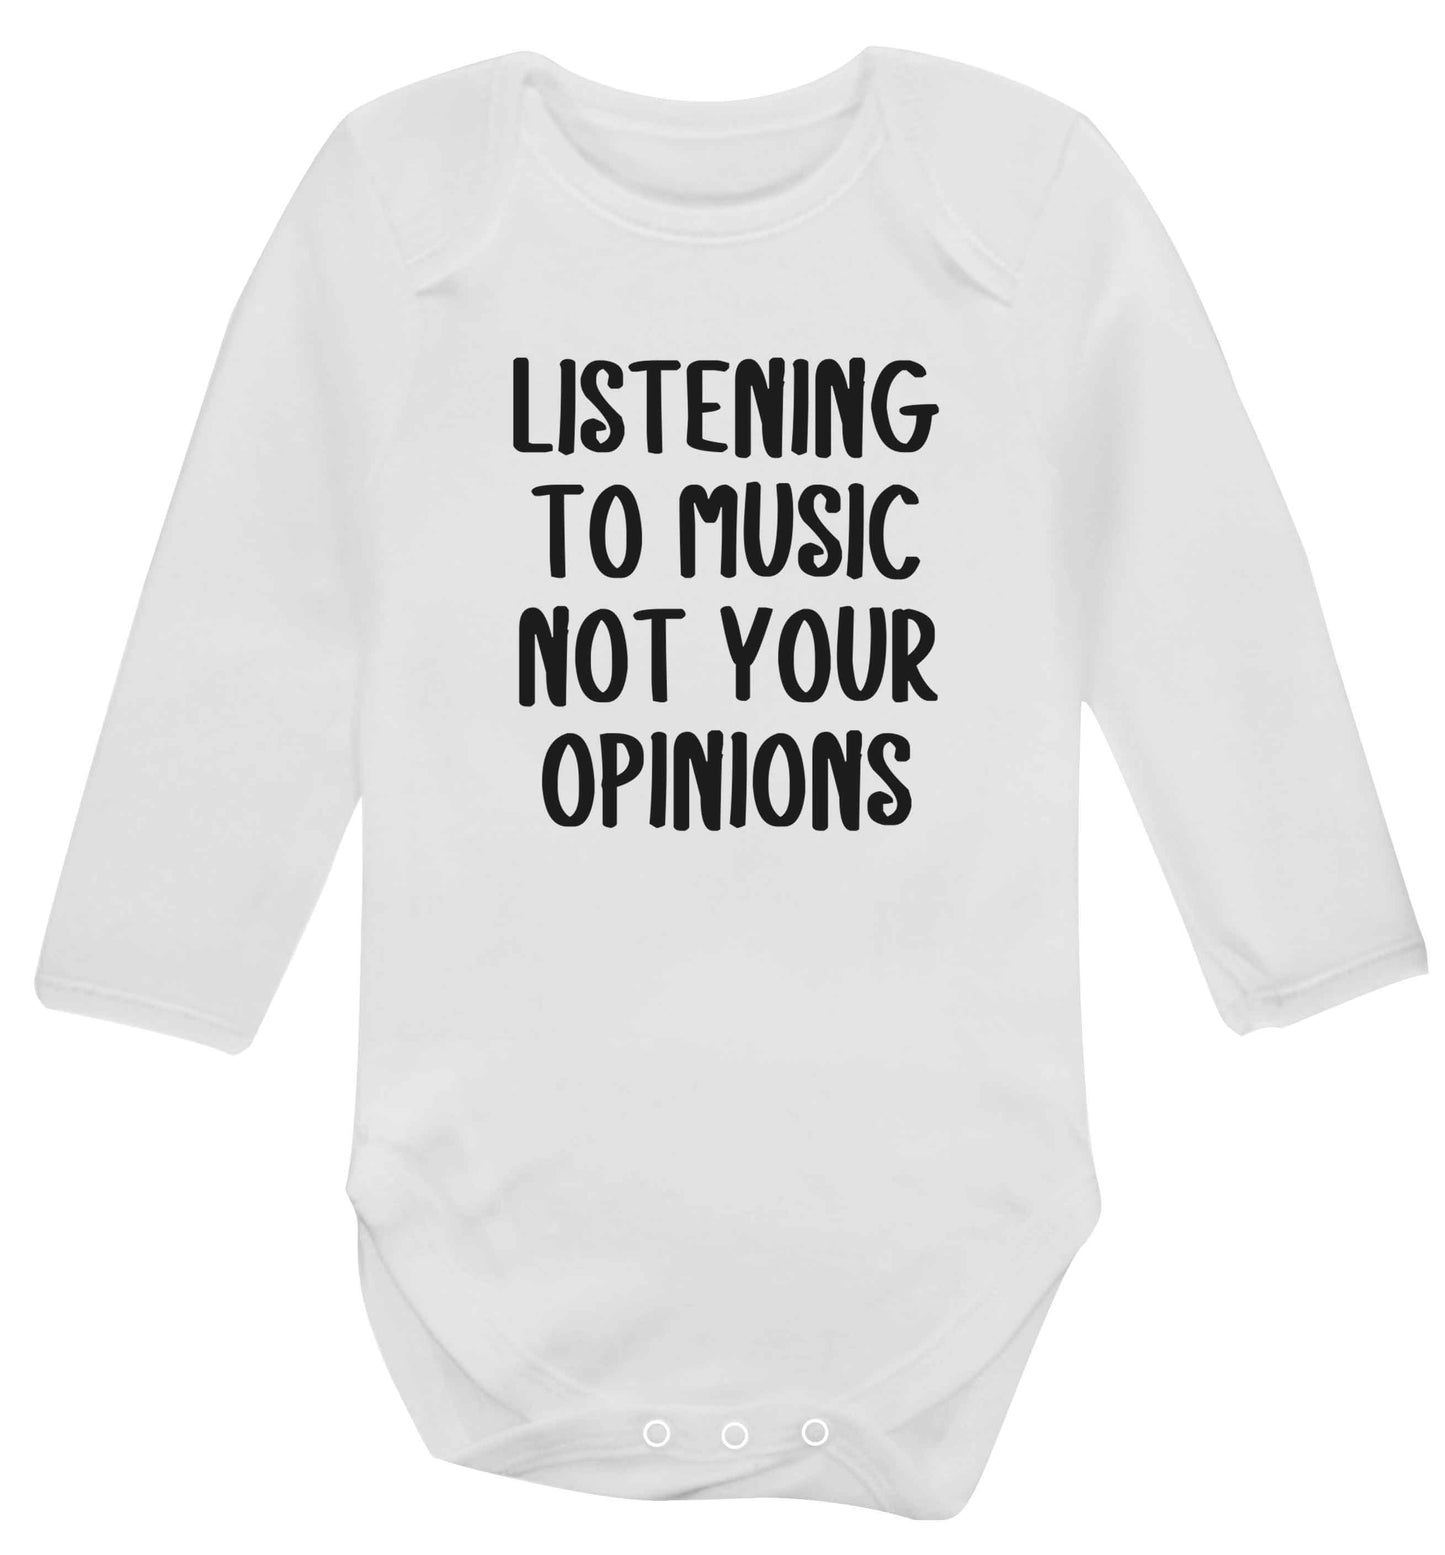 Listening to music not your opinions baby vest long sleeved white 6-12 months